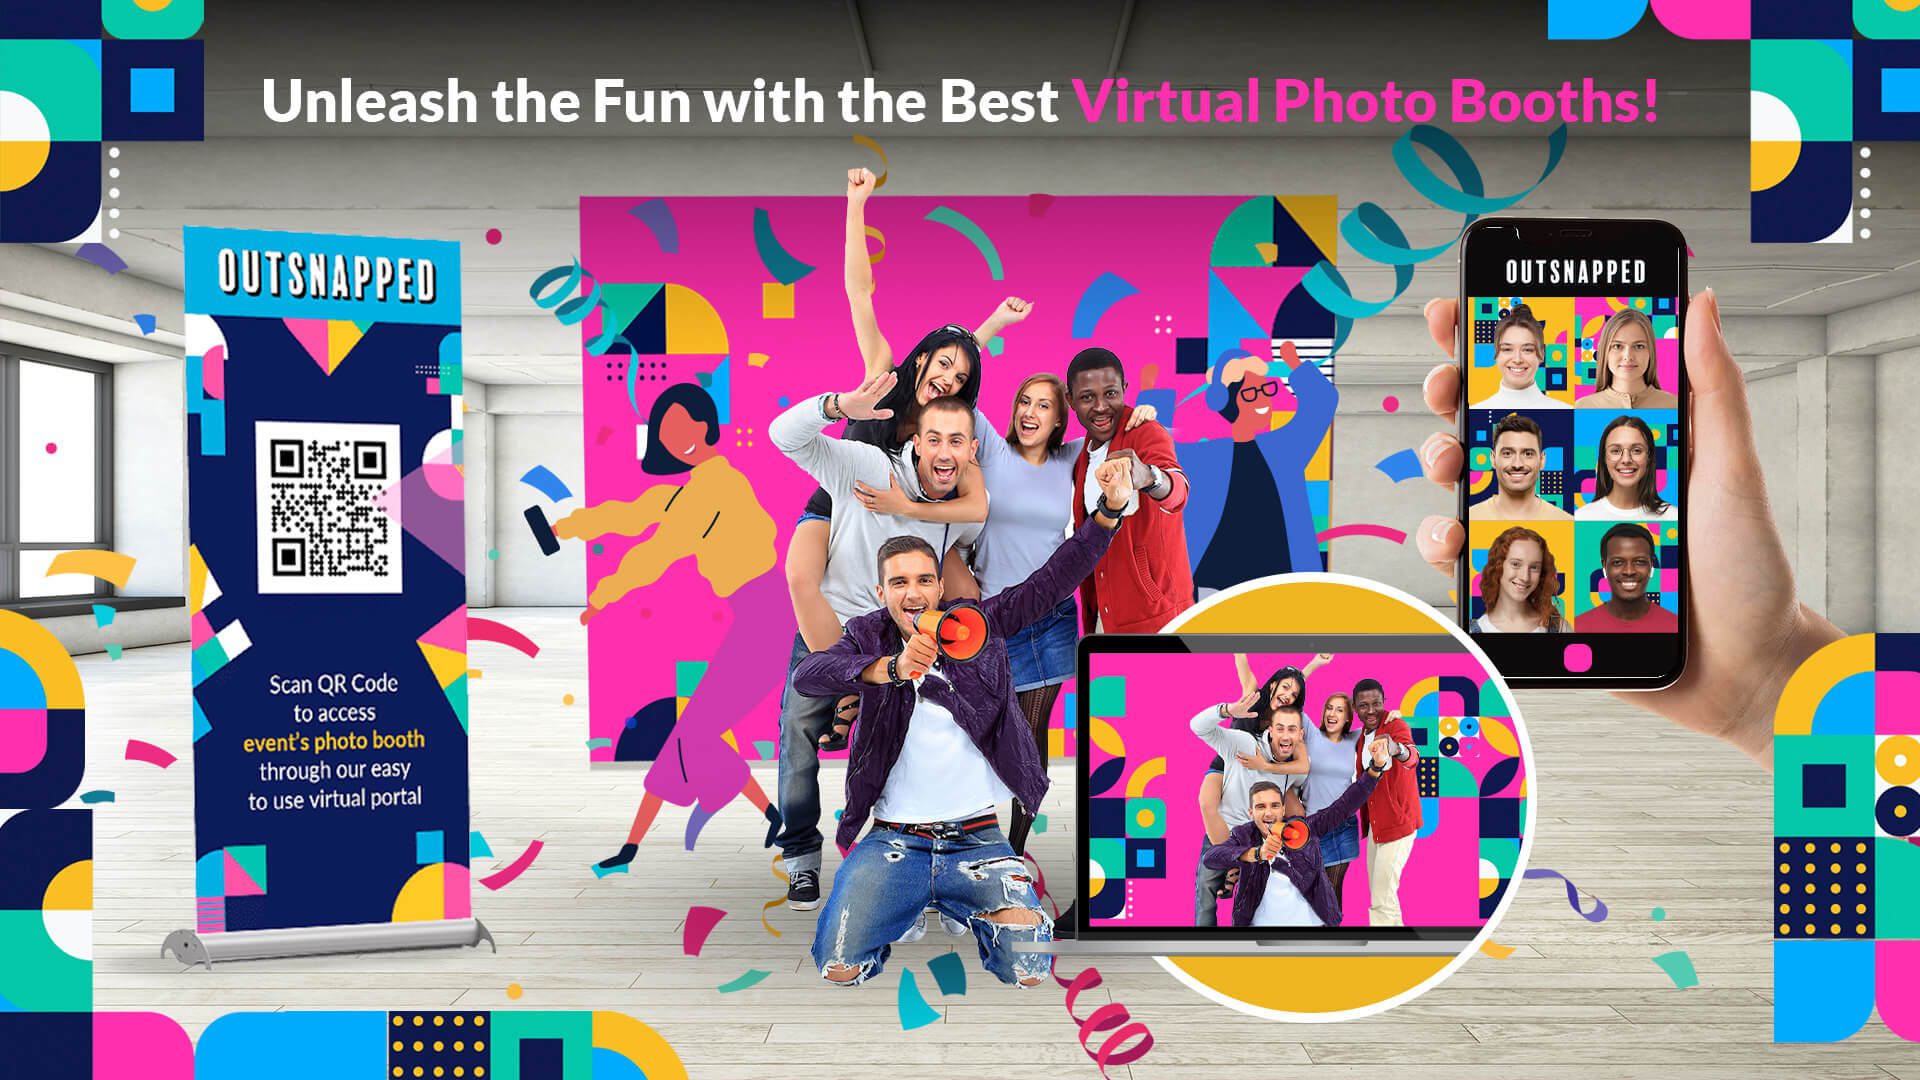 A header illustration showcasing a virtual photo booth setup. The illustration should show guests having fun and taking photos in front of the virtual photo booth, either on their phones or on a computer screen. The illustration can be illustrated in a colorful and energetic style, with guests smiling, laughing and making silly faces.